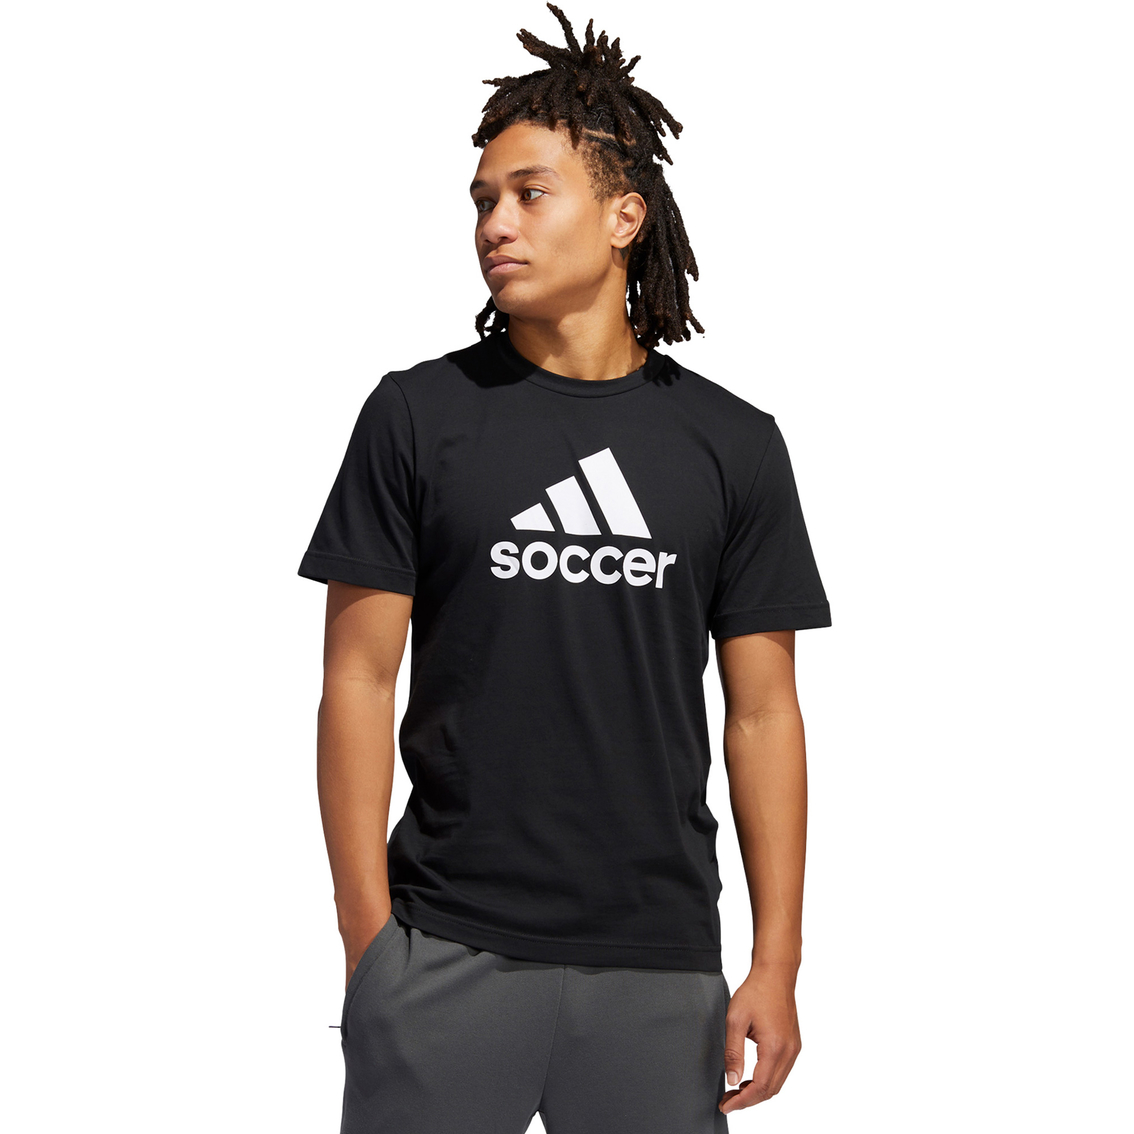 Adidas Badge Of Sport Soccer Tee | Shirts | Clothing & Accessories ...